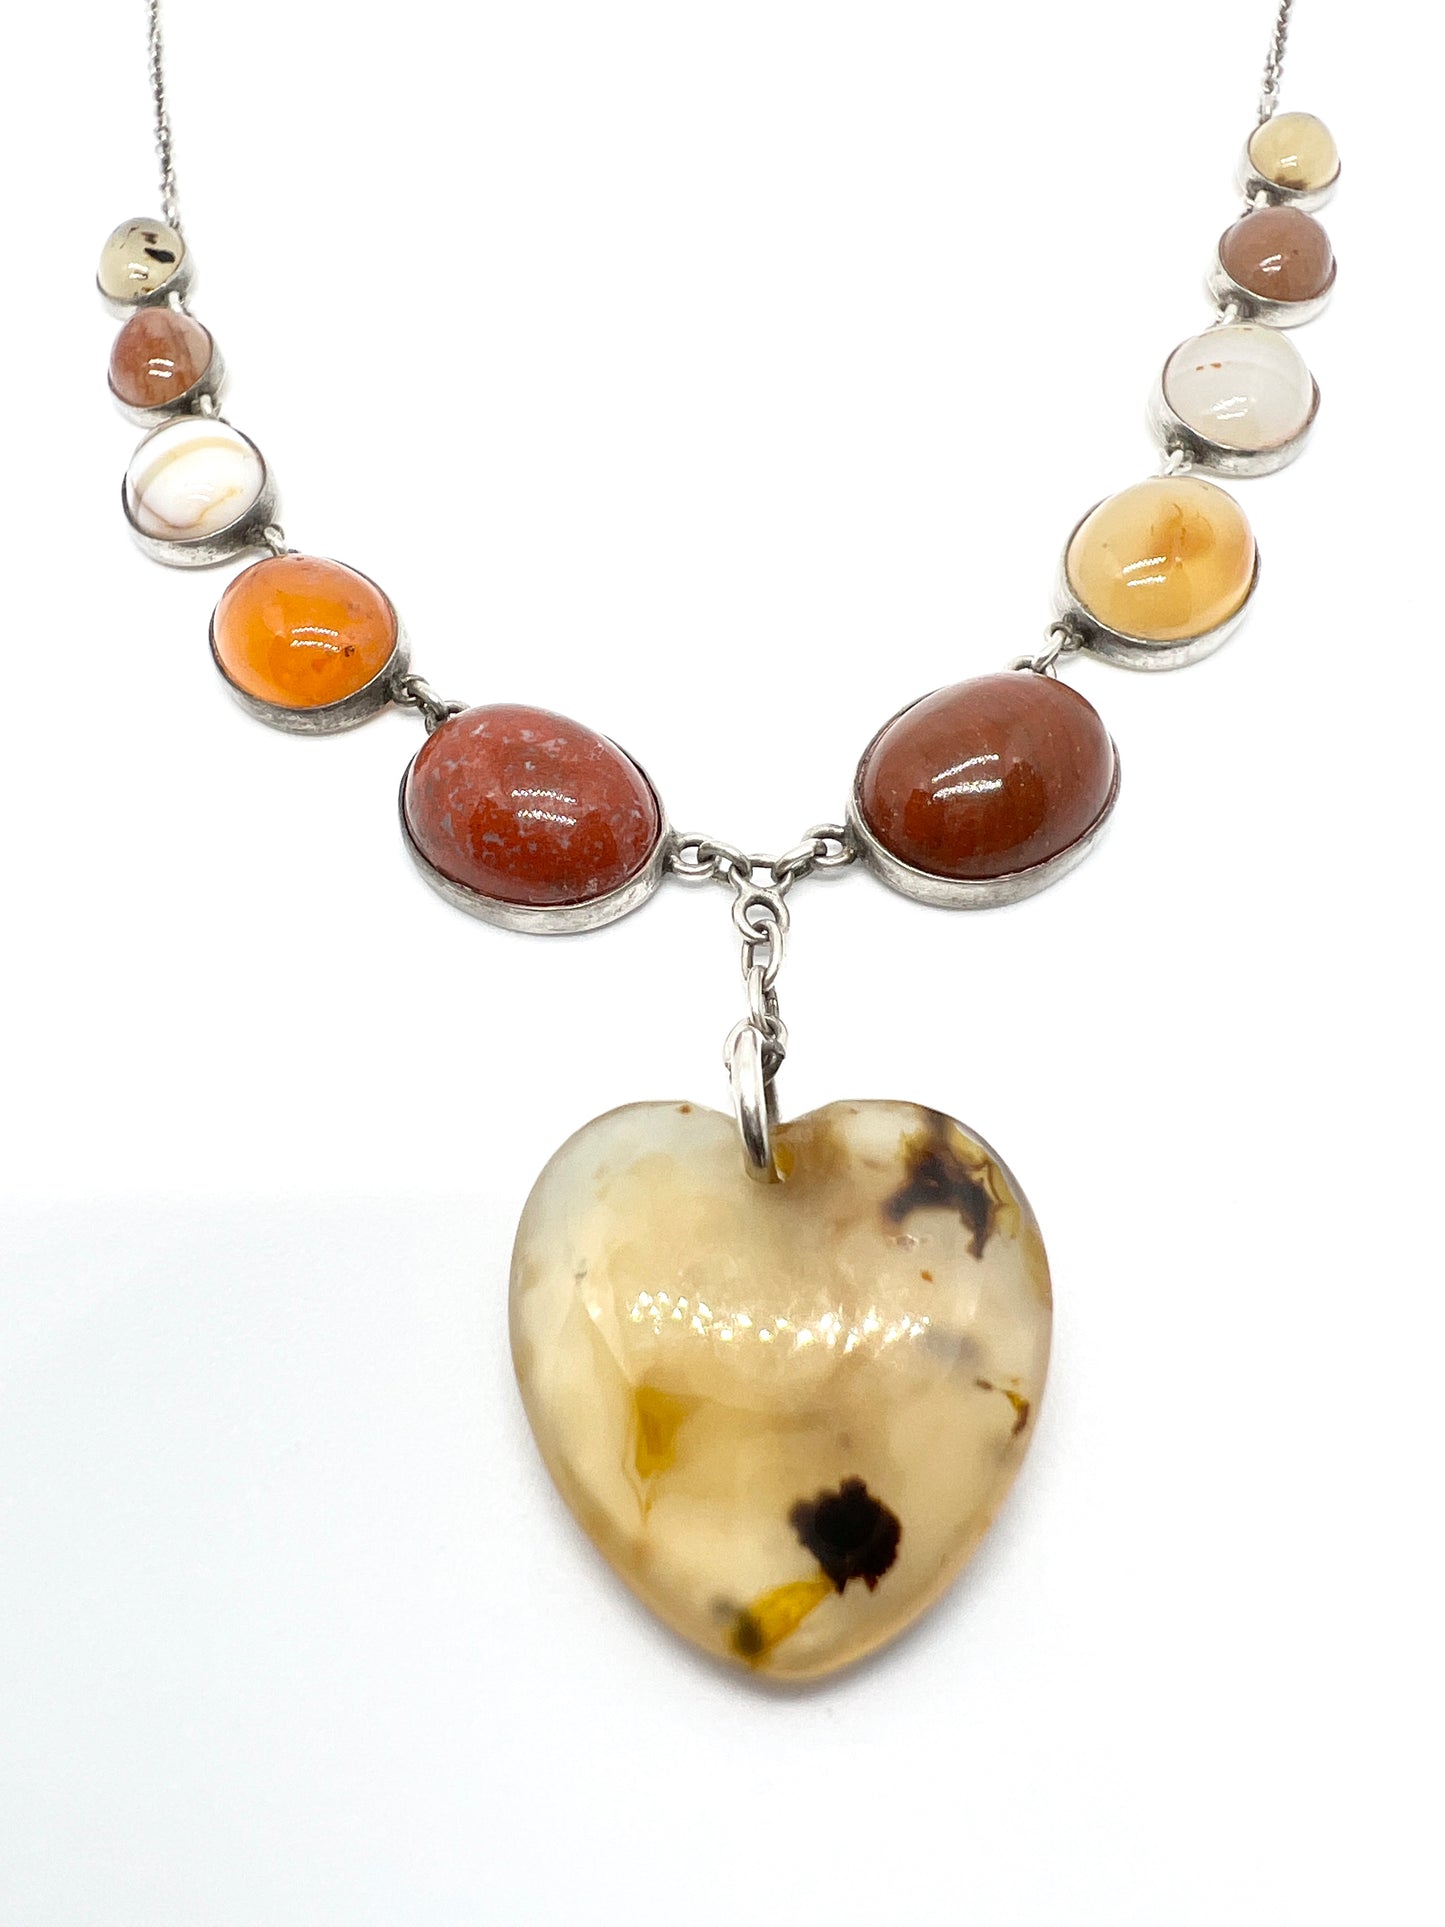 Sweden 1930-40s. Solid Silver Agate Heart Necklace.